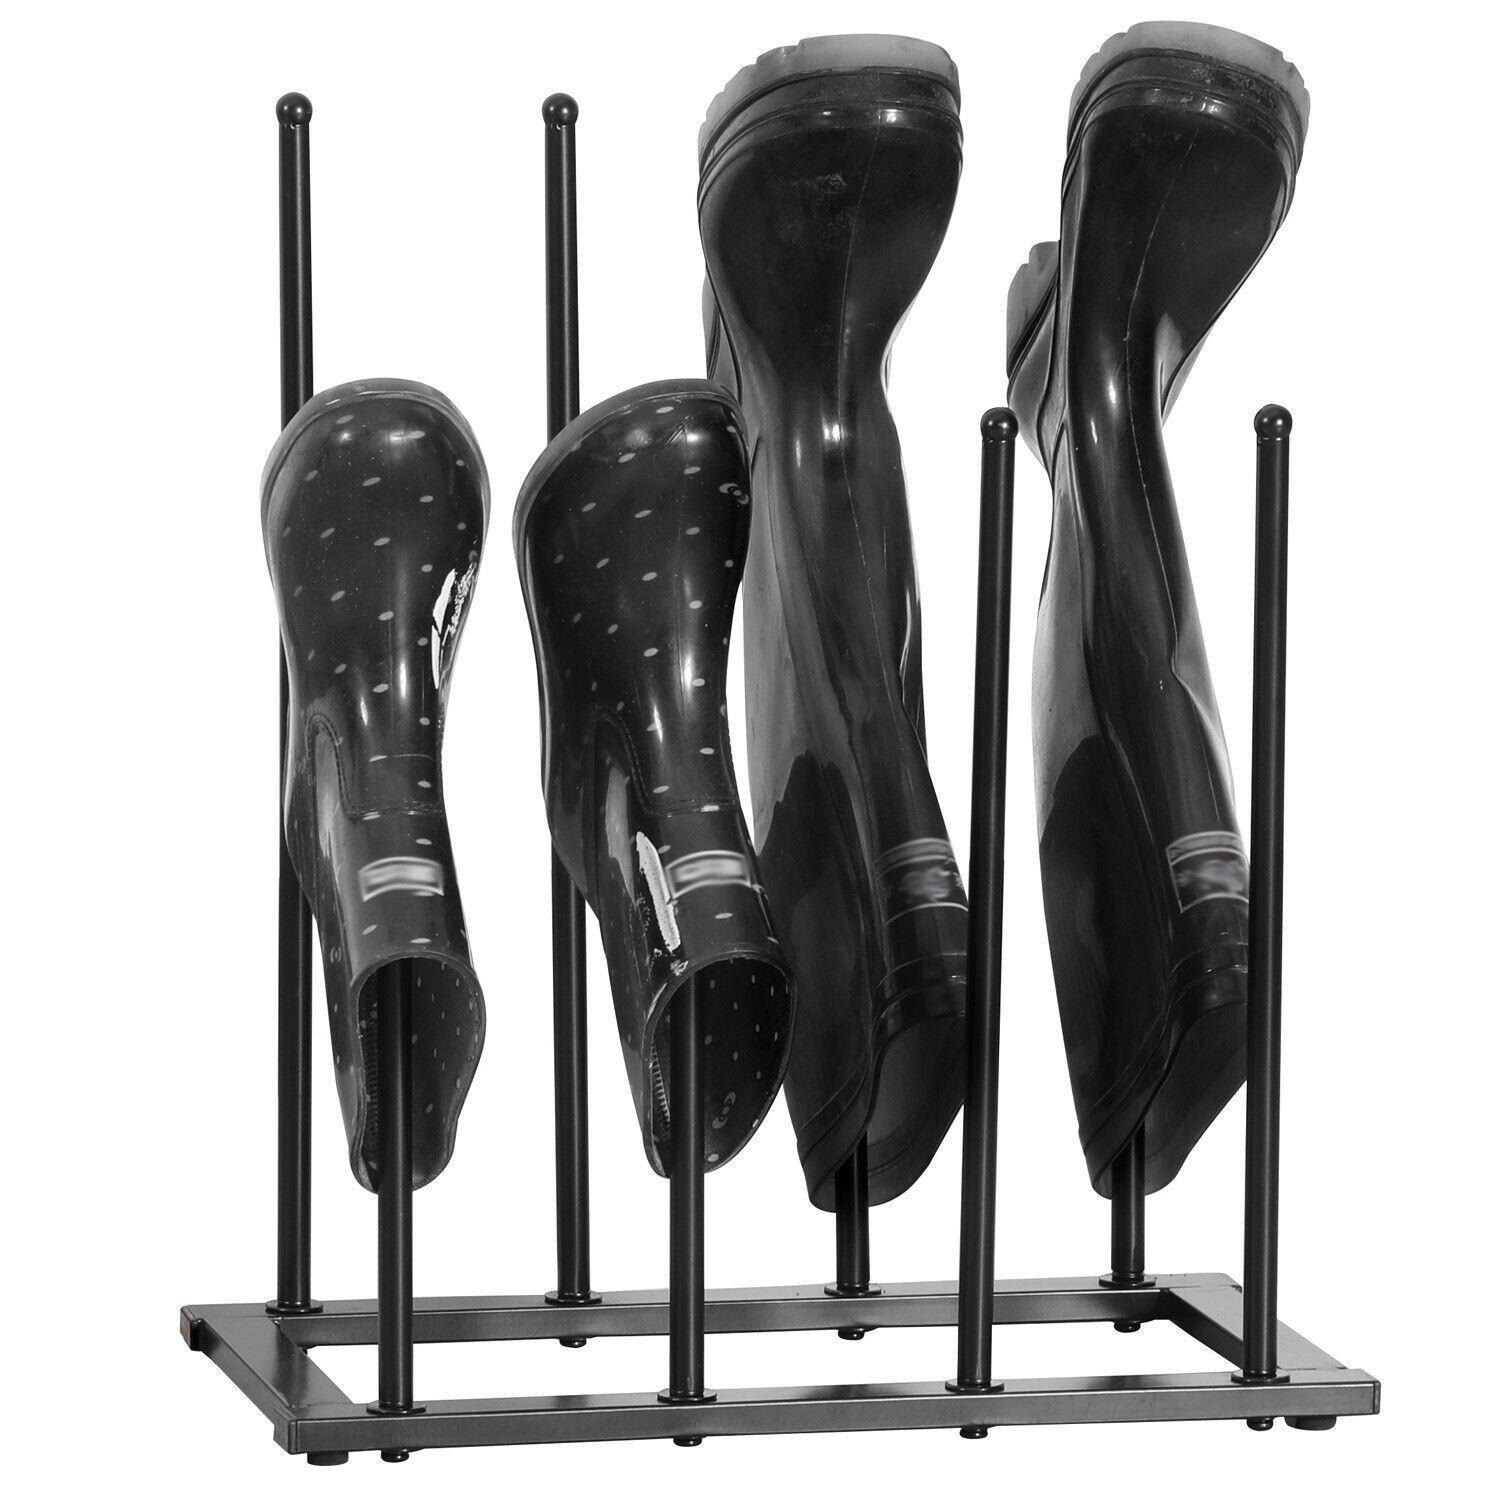 4 Pair Dryer Metal Welly Walking Boot Stand Shoe Rack Garden Shed Home Storage - image 1